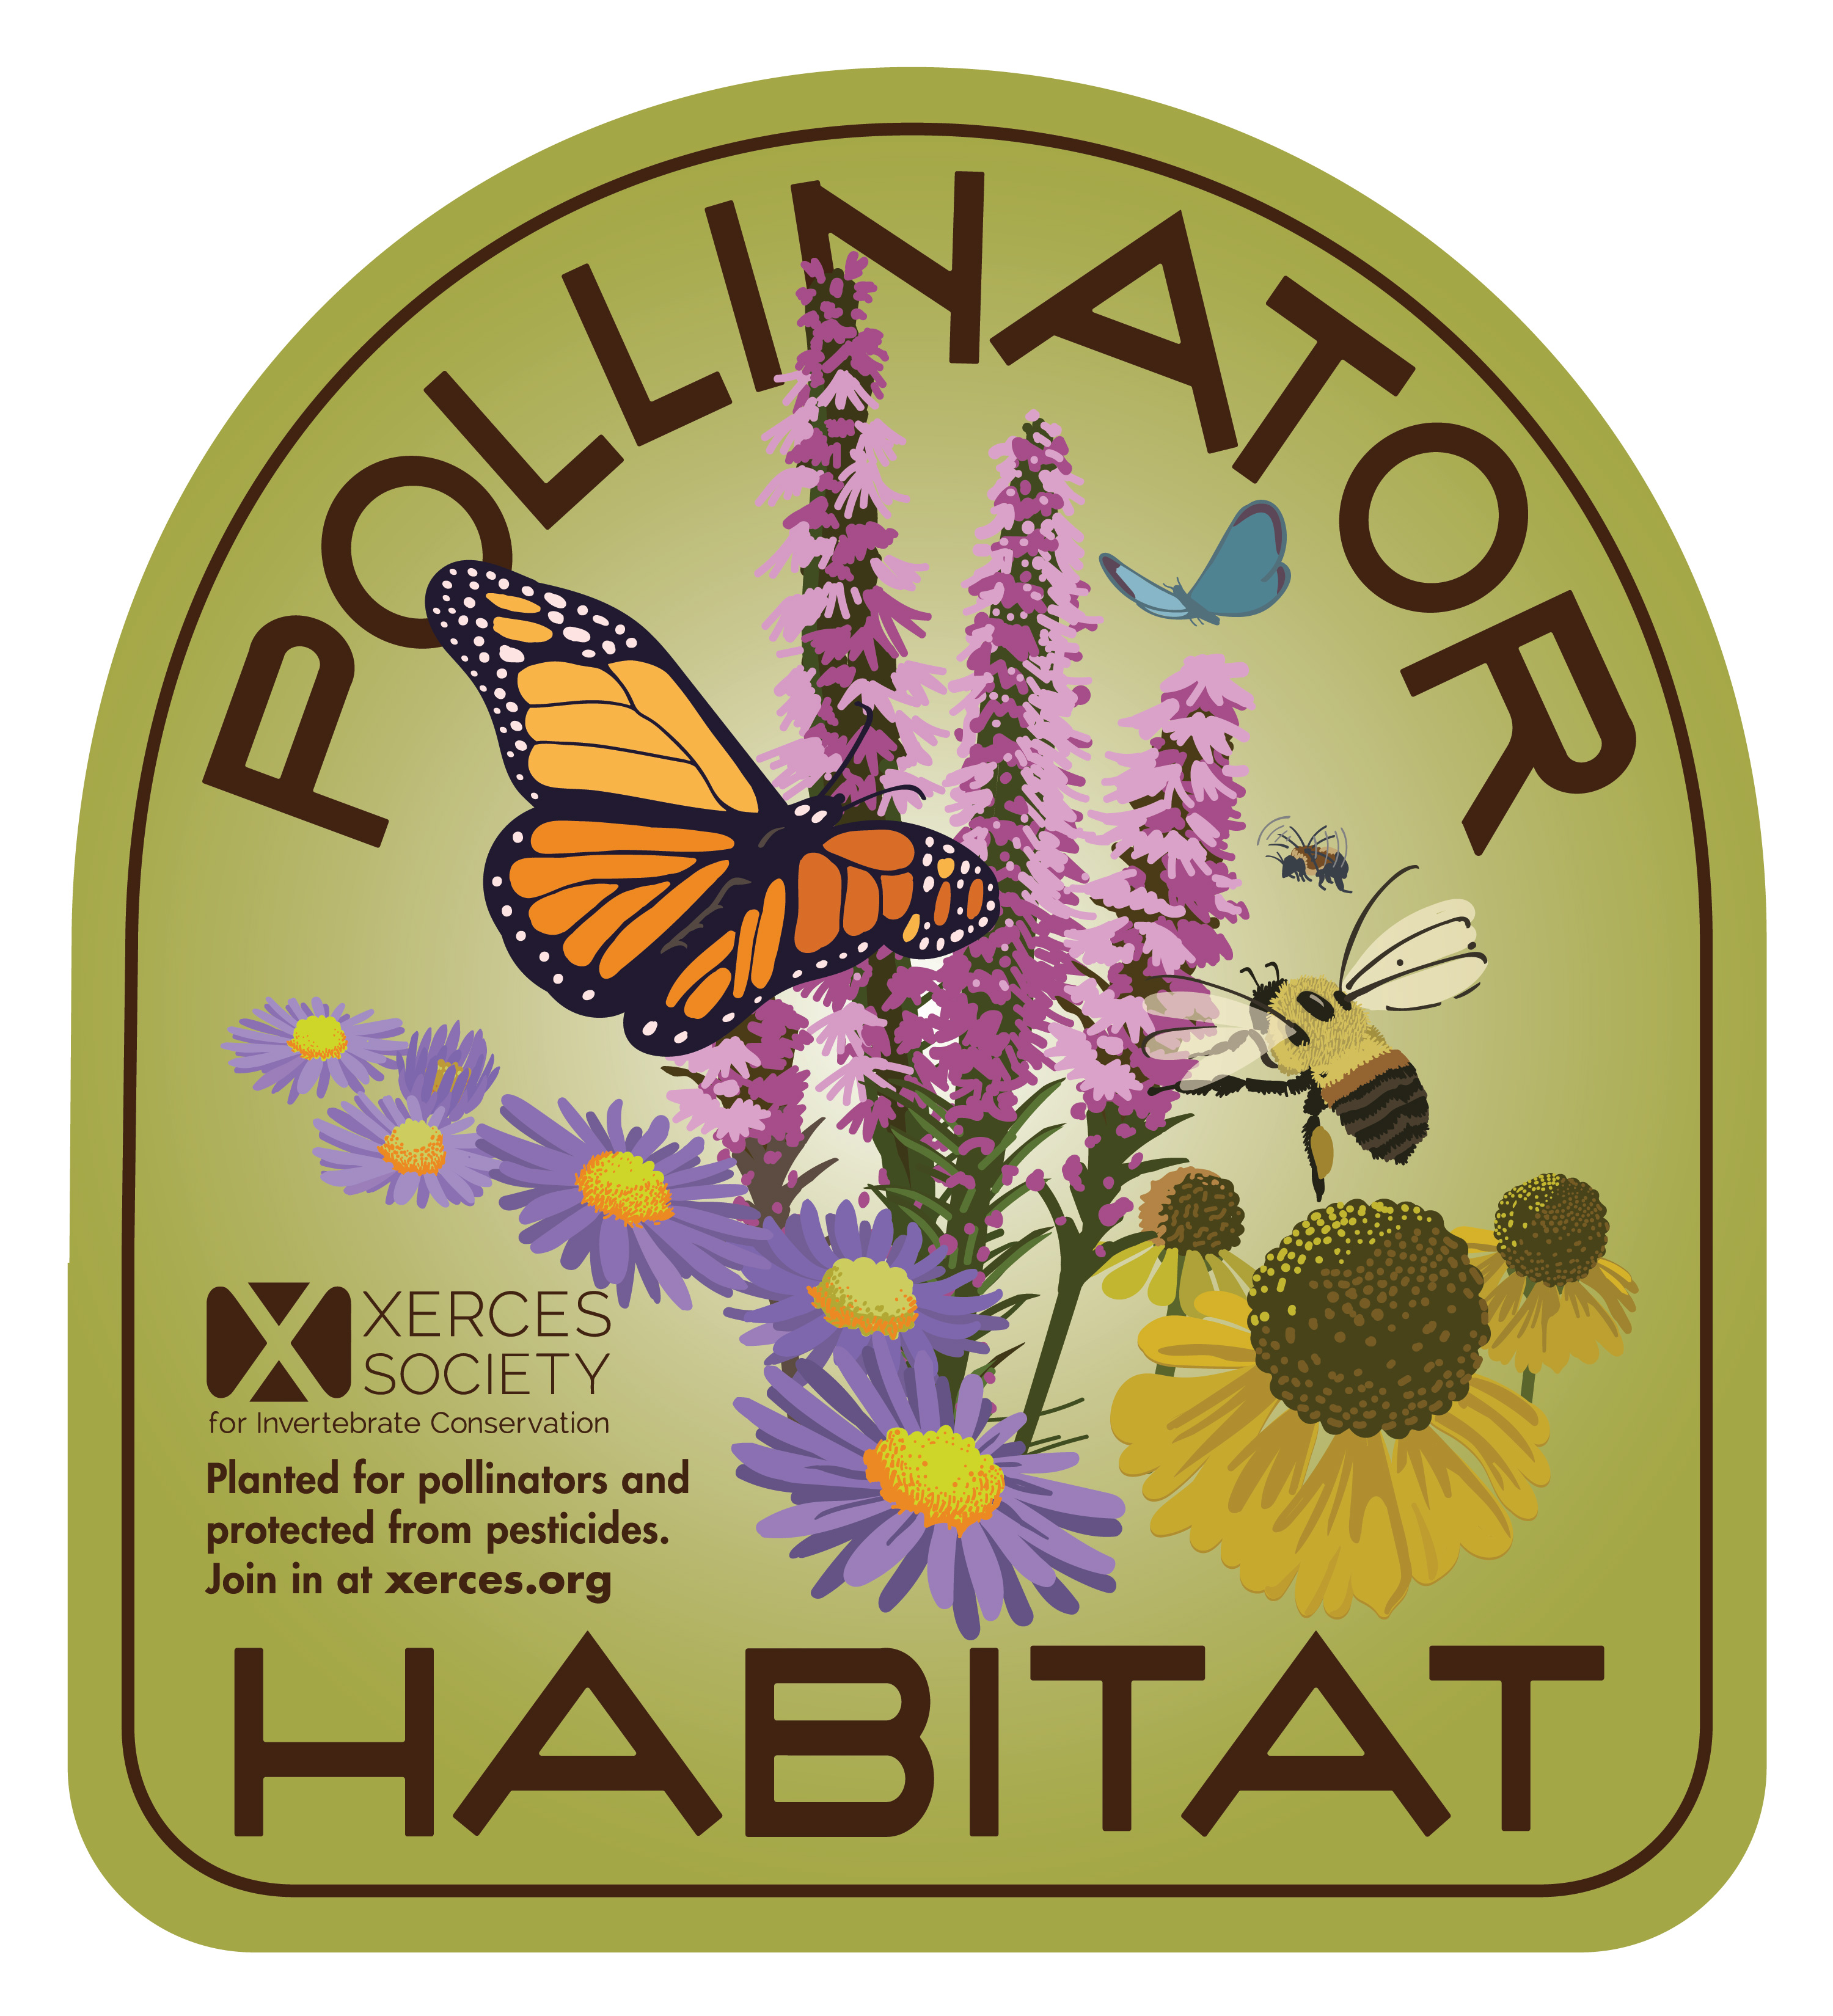 A Xerces Society Pollinator Habitat sign is shown.